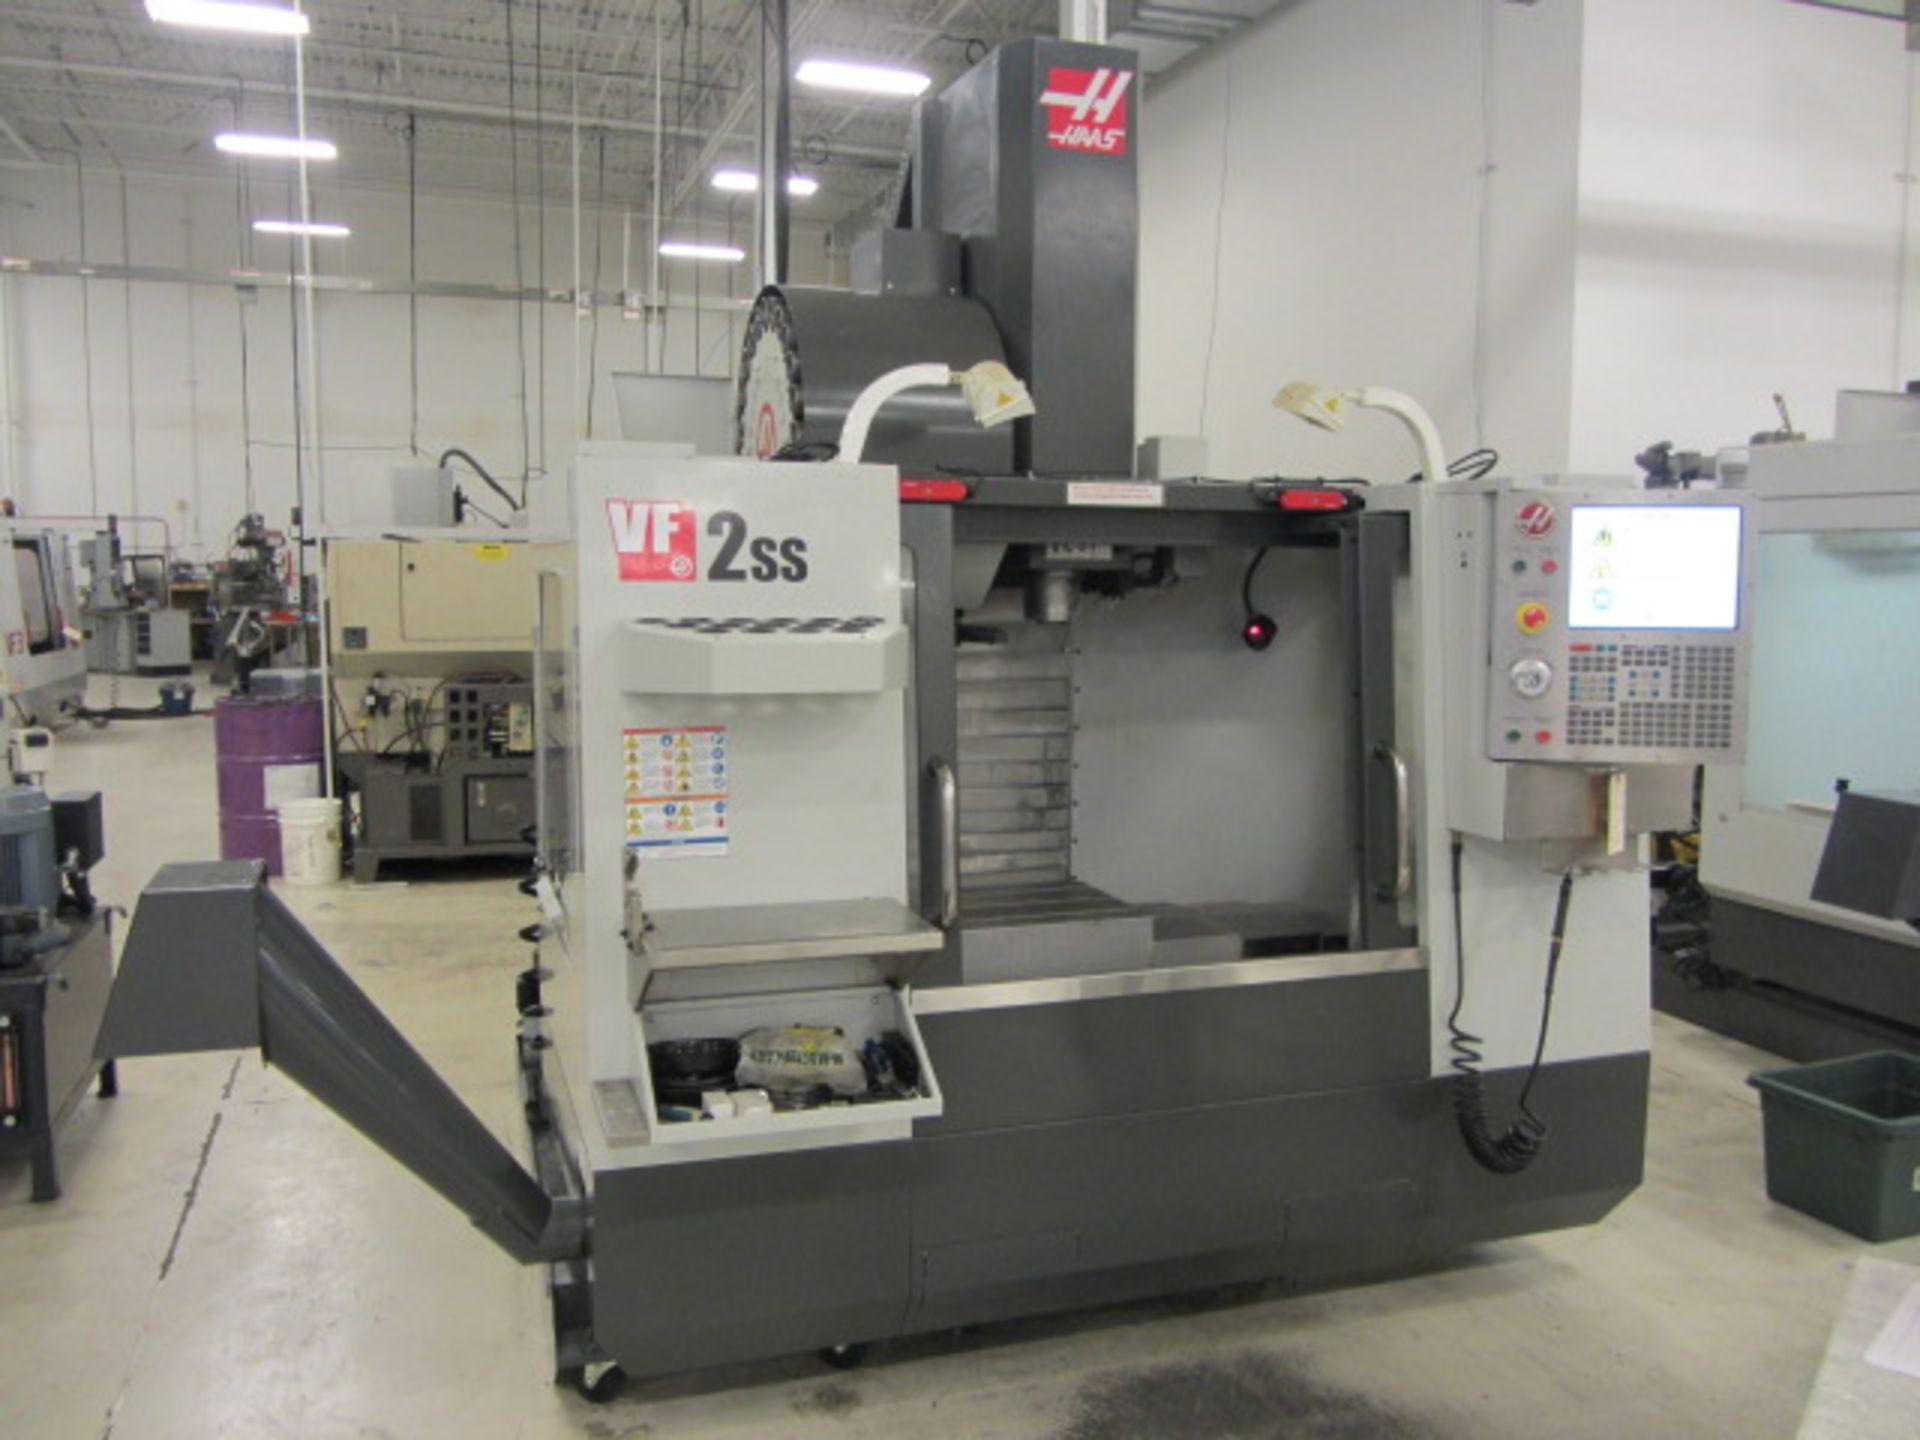 Haas VF-2SS Super Speed CNC Vertical Machining Center with 36'' x 14'' Table, #40 Taper Spindle